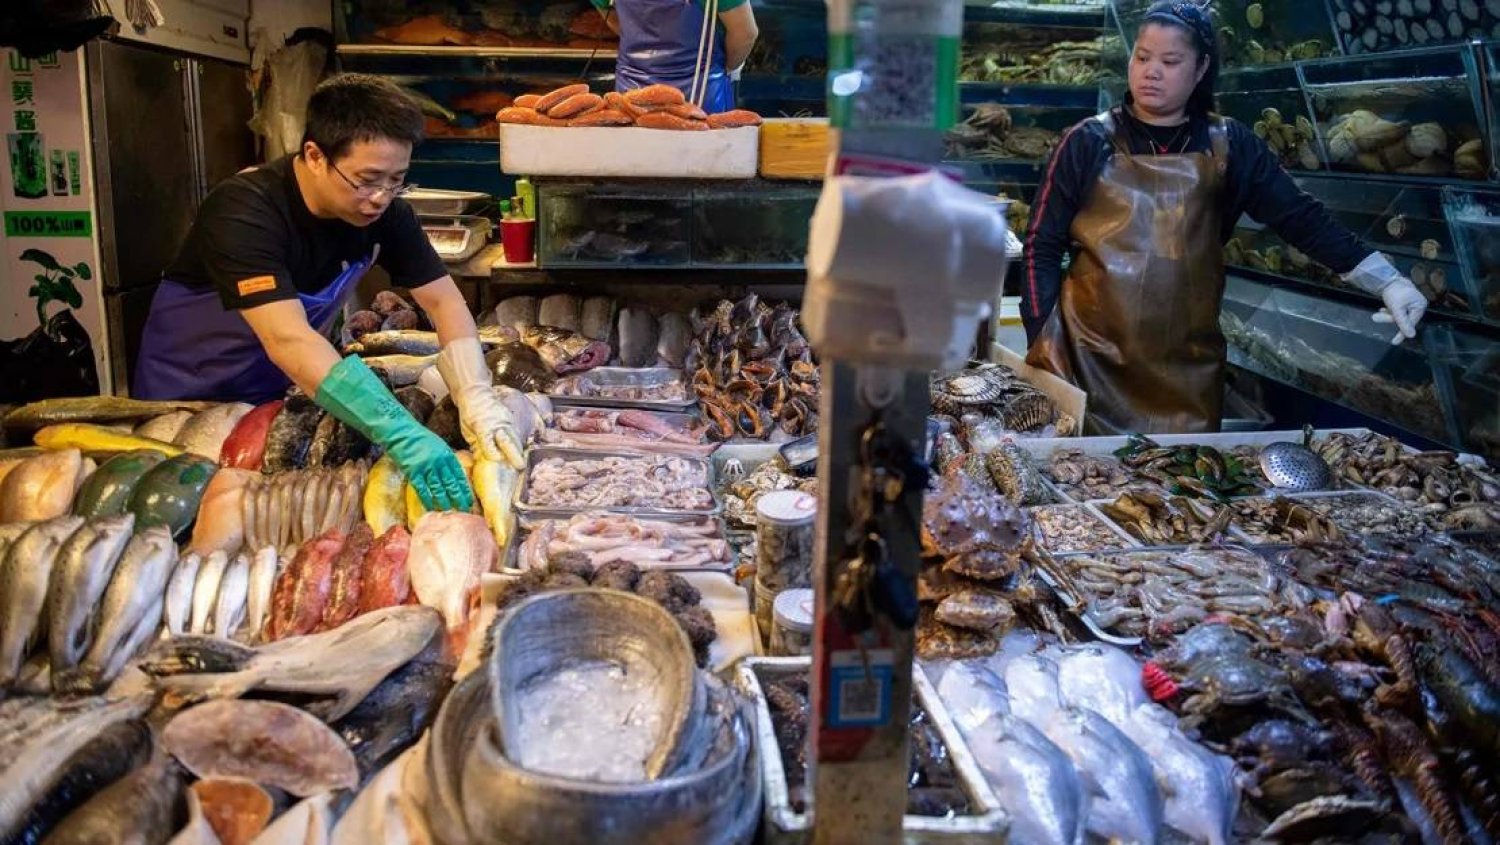 Workers prepare a stall filled with seafood at a market in Beijing on July 10, 2019. (AFP) 